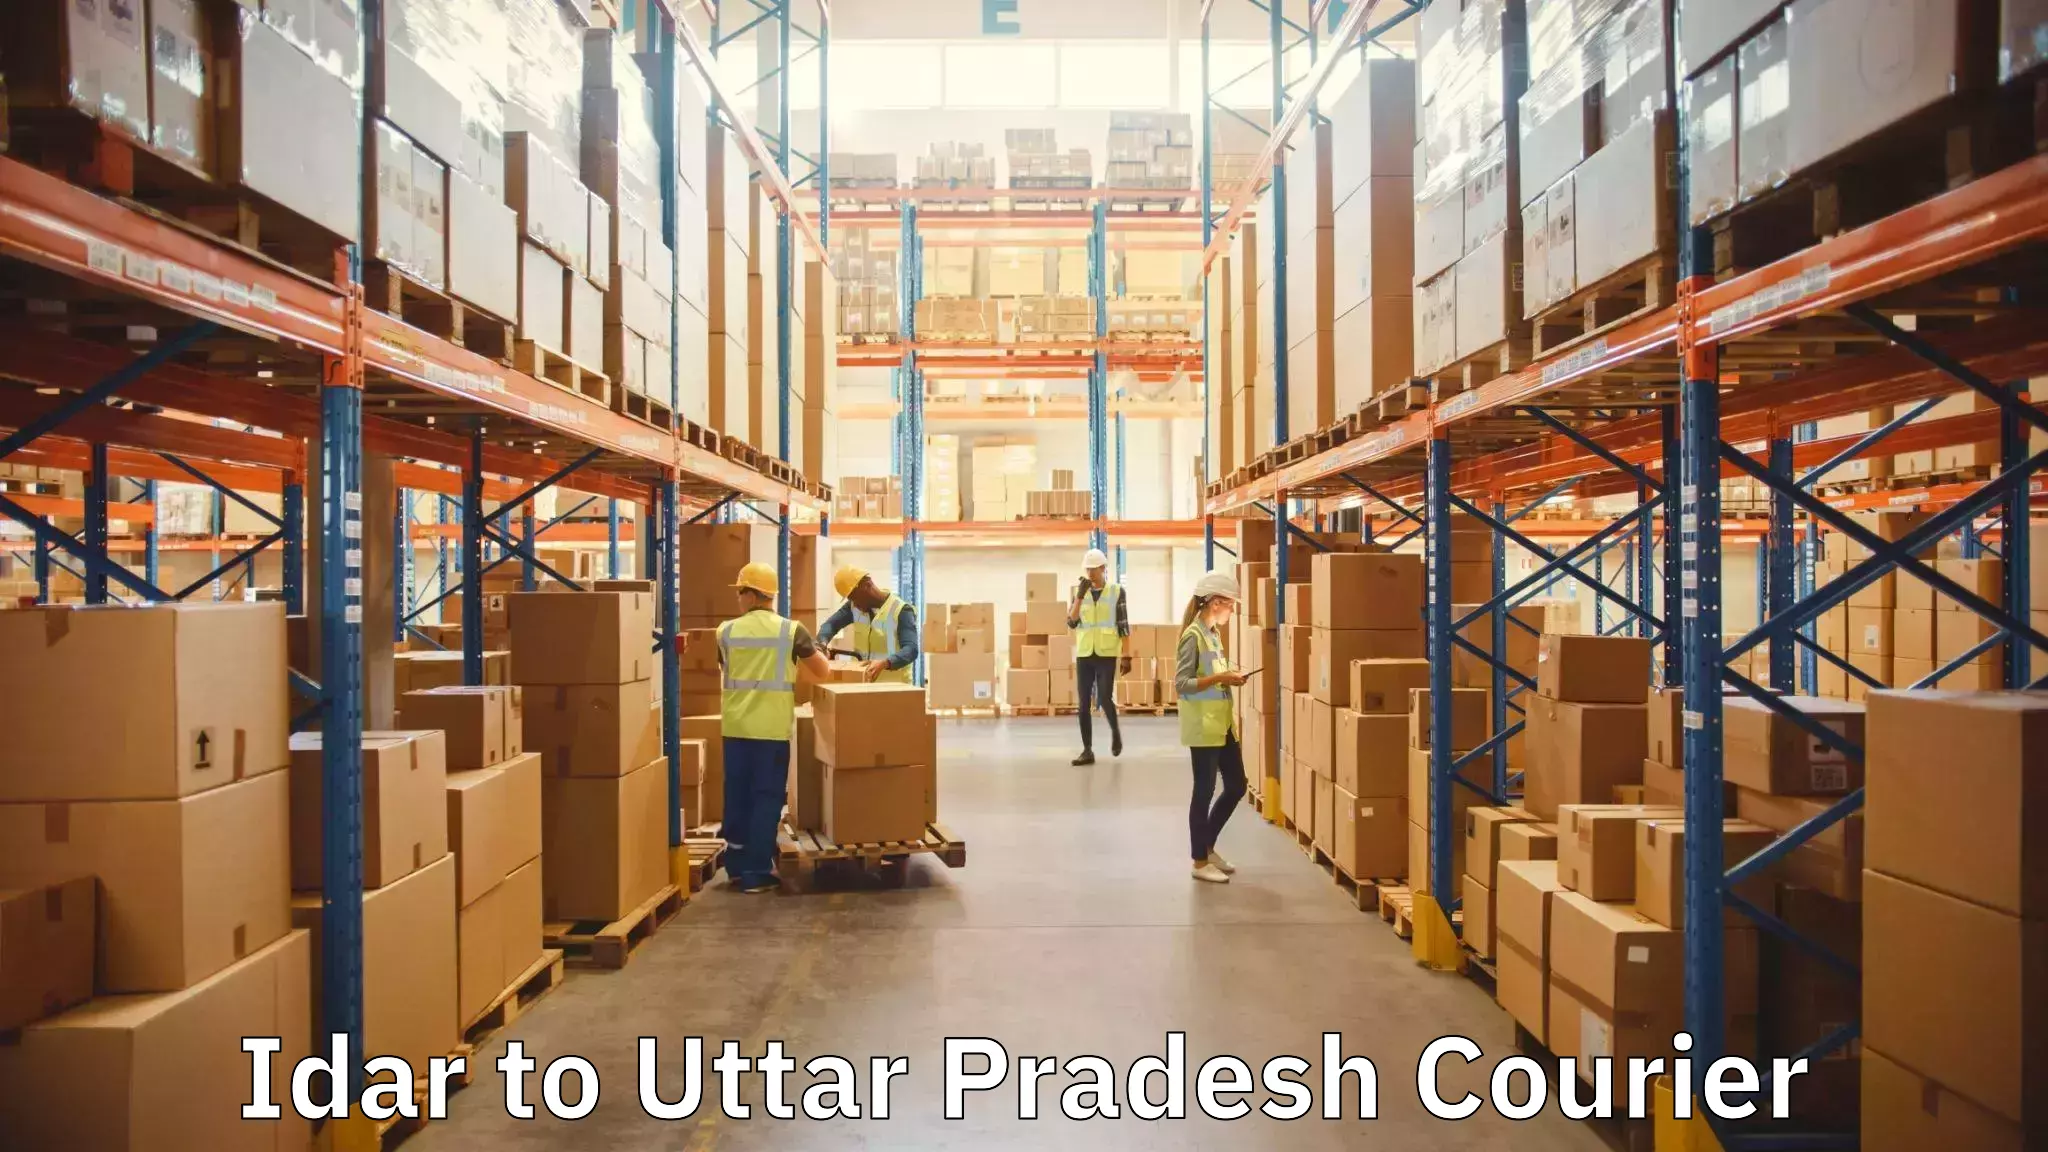 Household goods movers and packers Idar to Rath